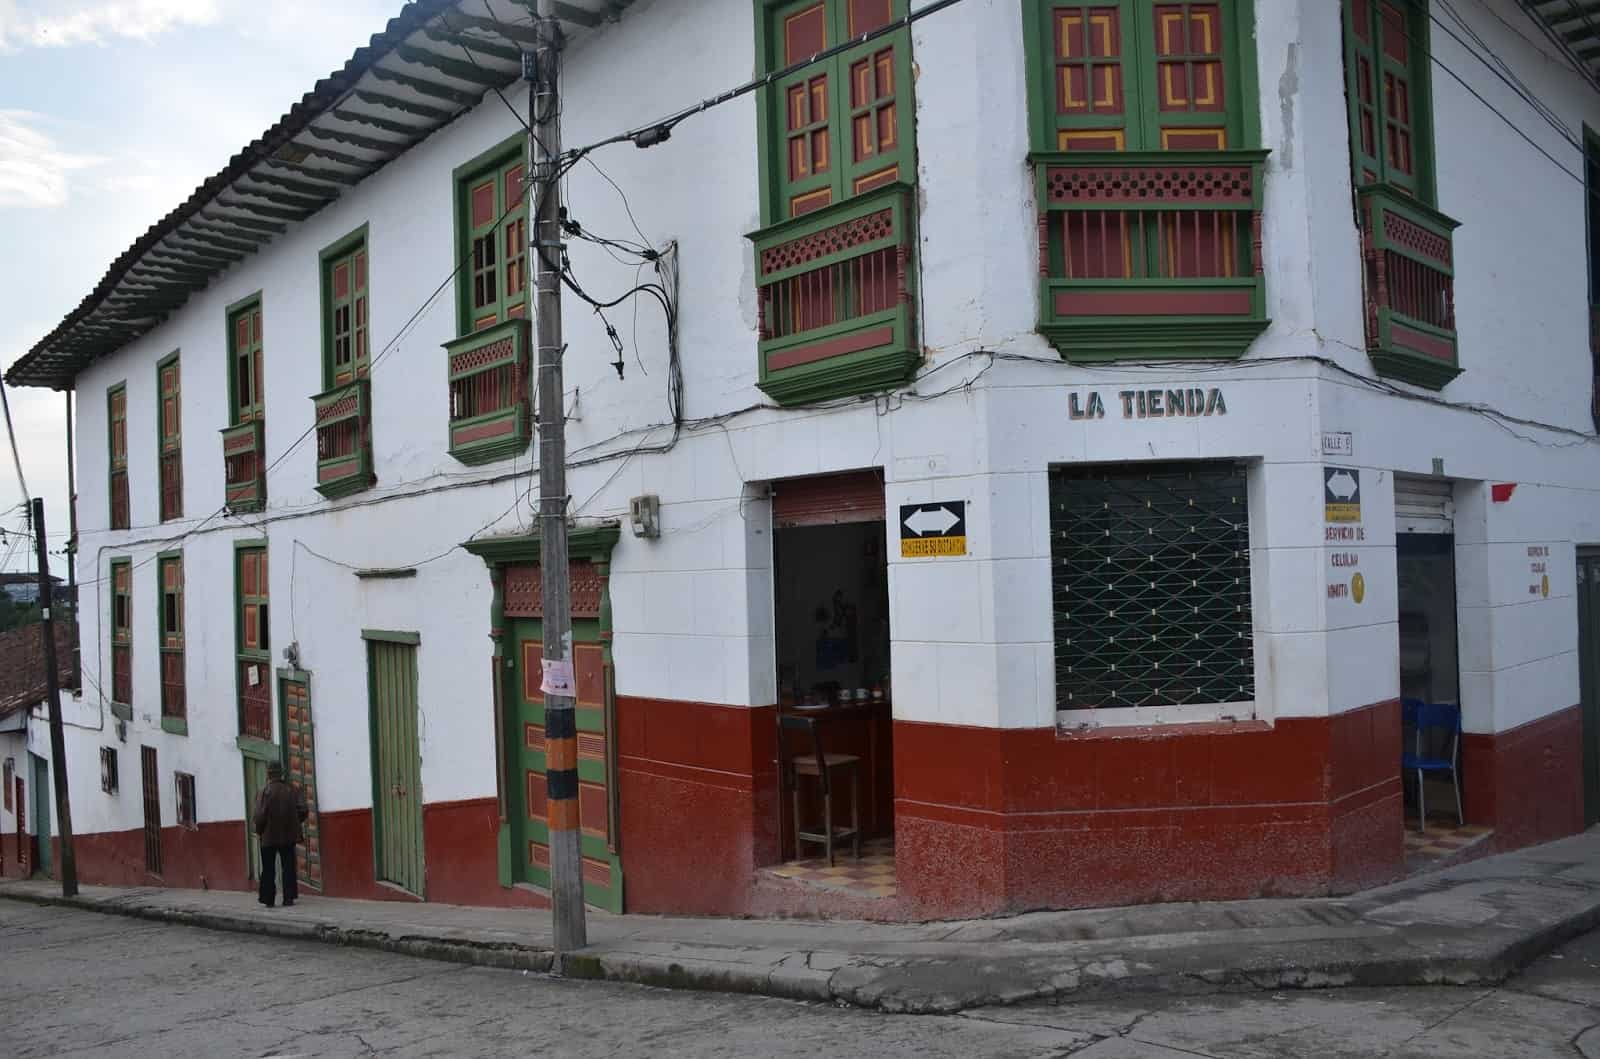 Building at Carrera 5 and Calle 5